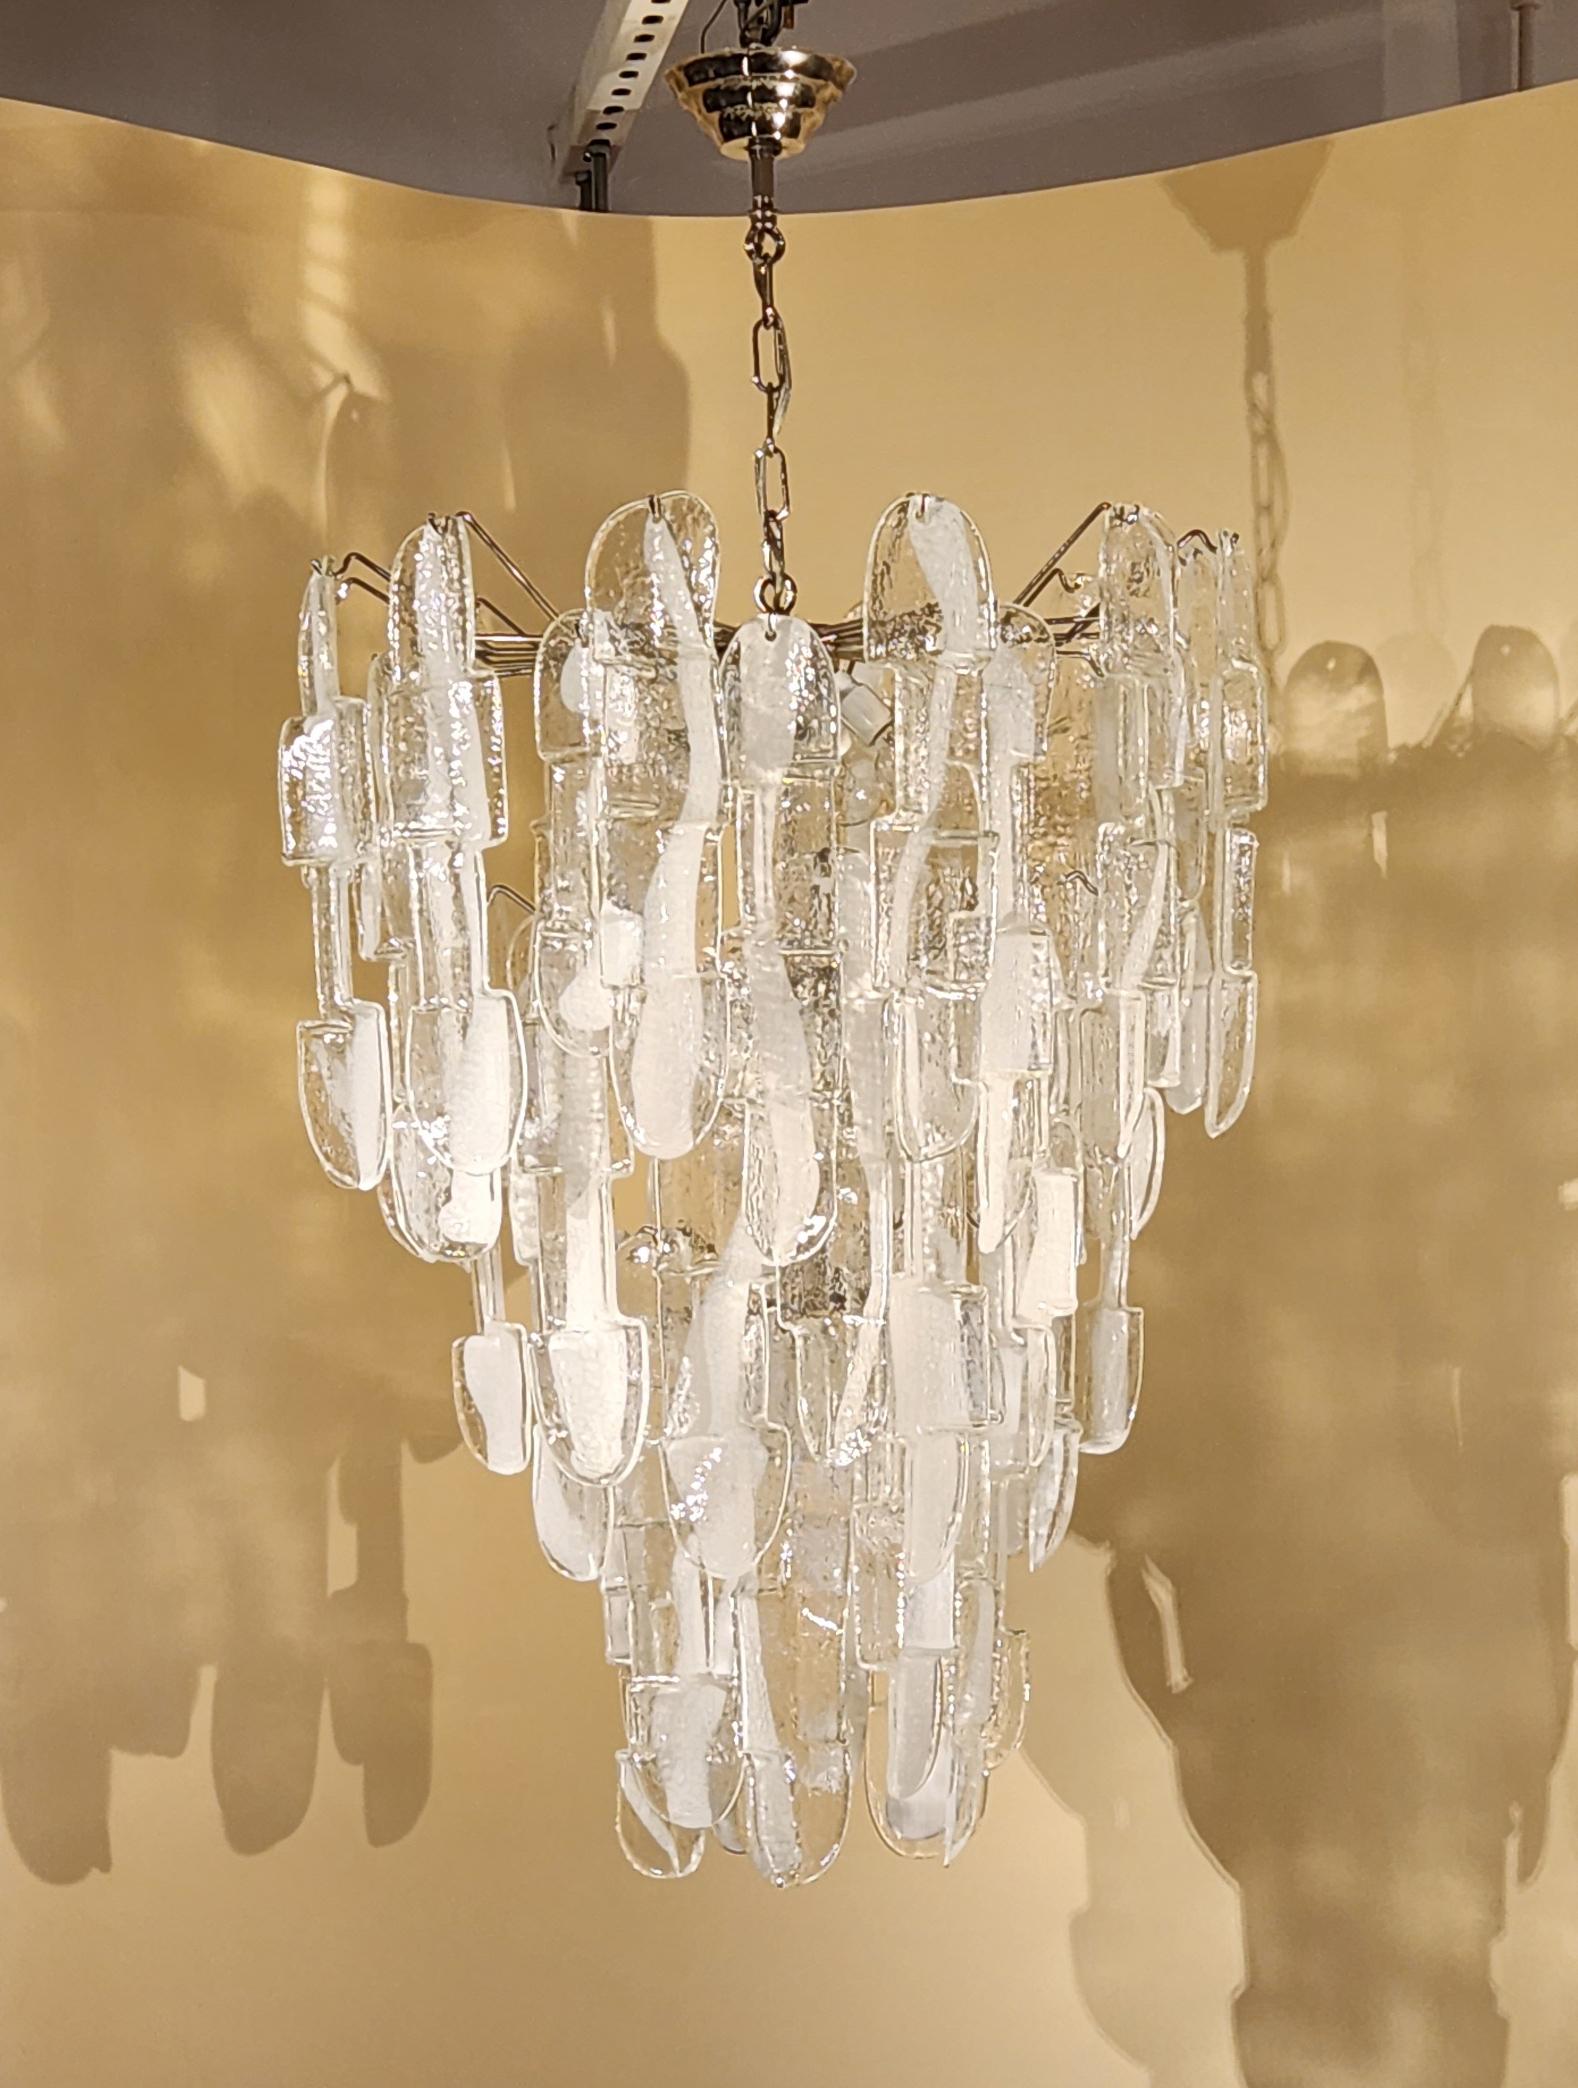 A large magnificent Mazzega Murano Art glass chandelier from Italy, circa 1960. The chandelier has a chrome framing and contains 50 large art glass prisms. It takes 8 light bulbs.